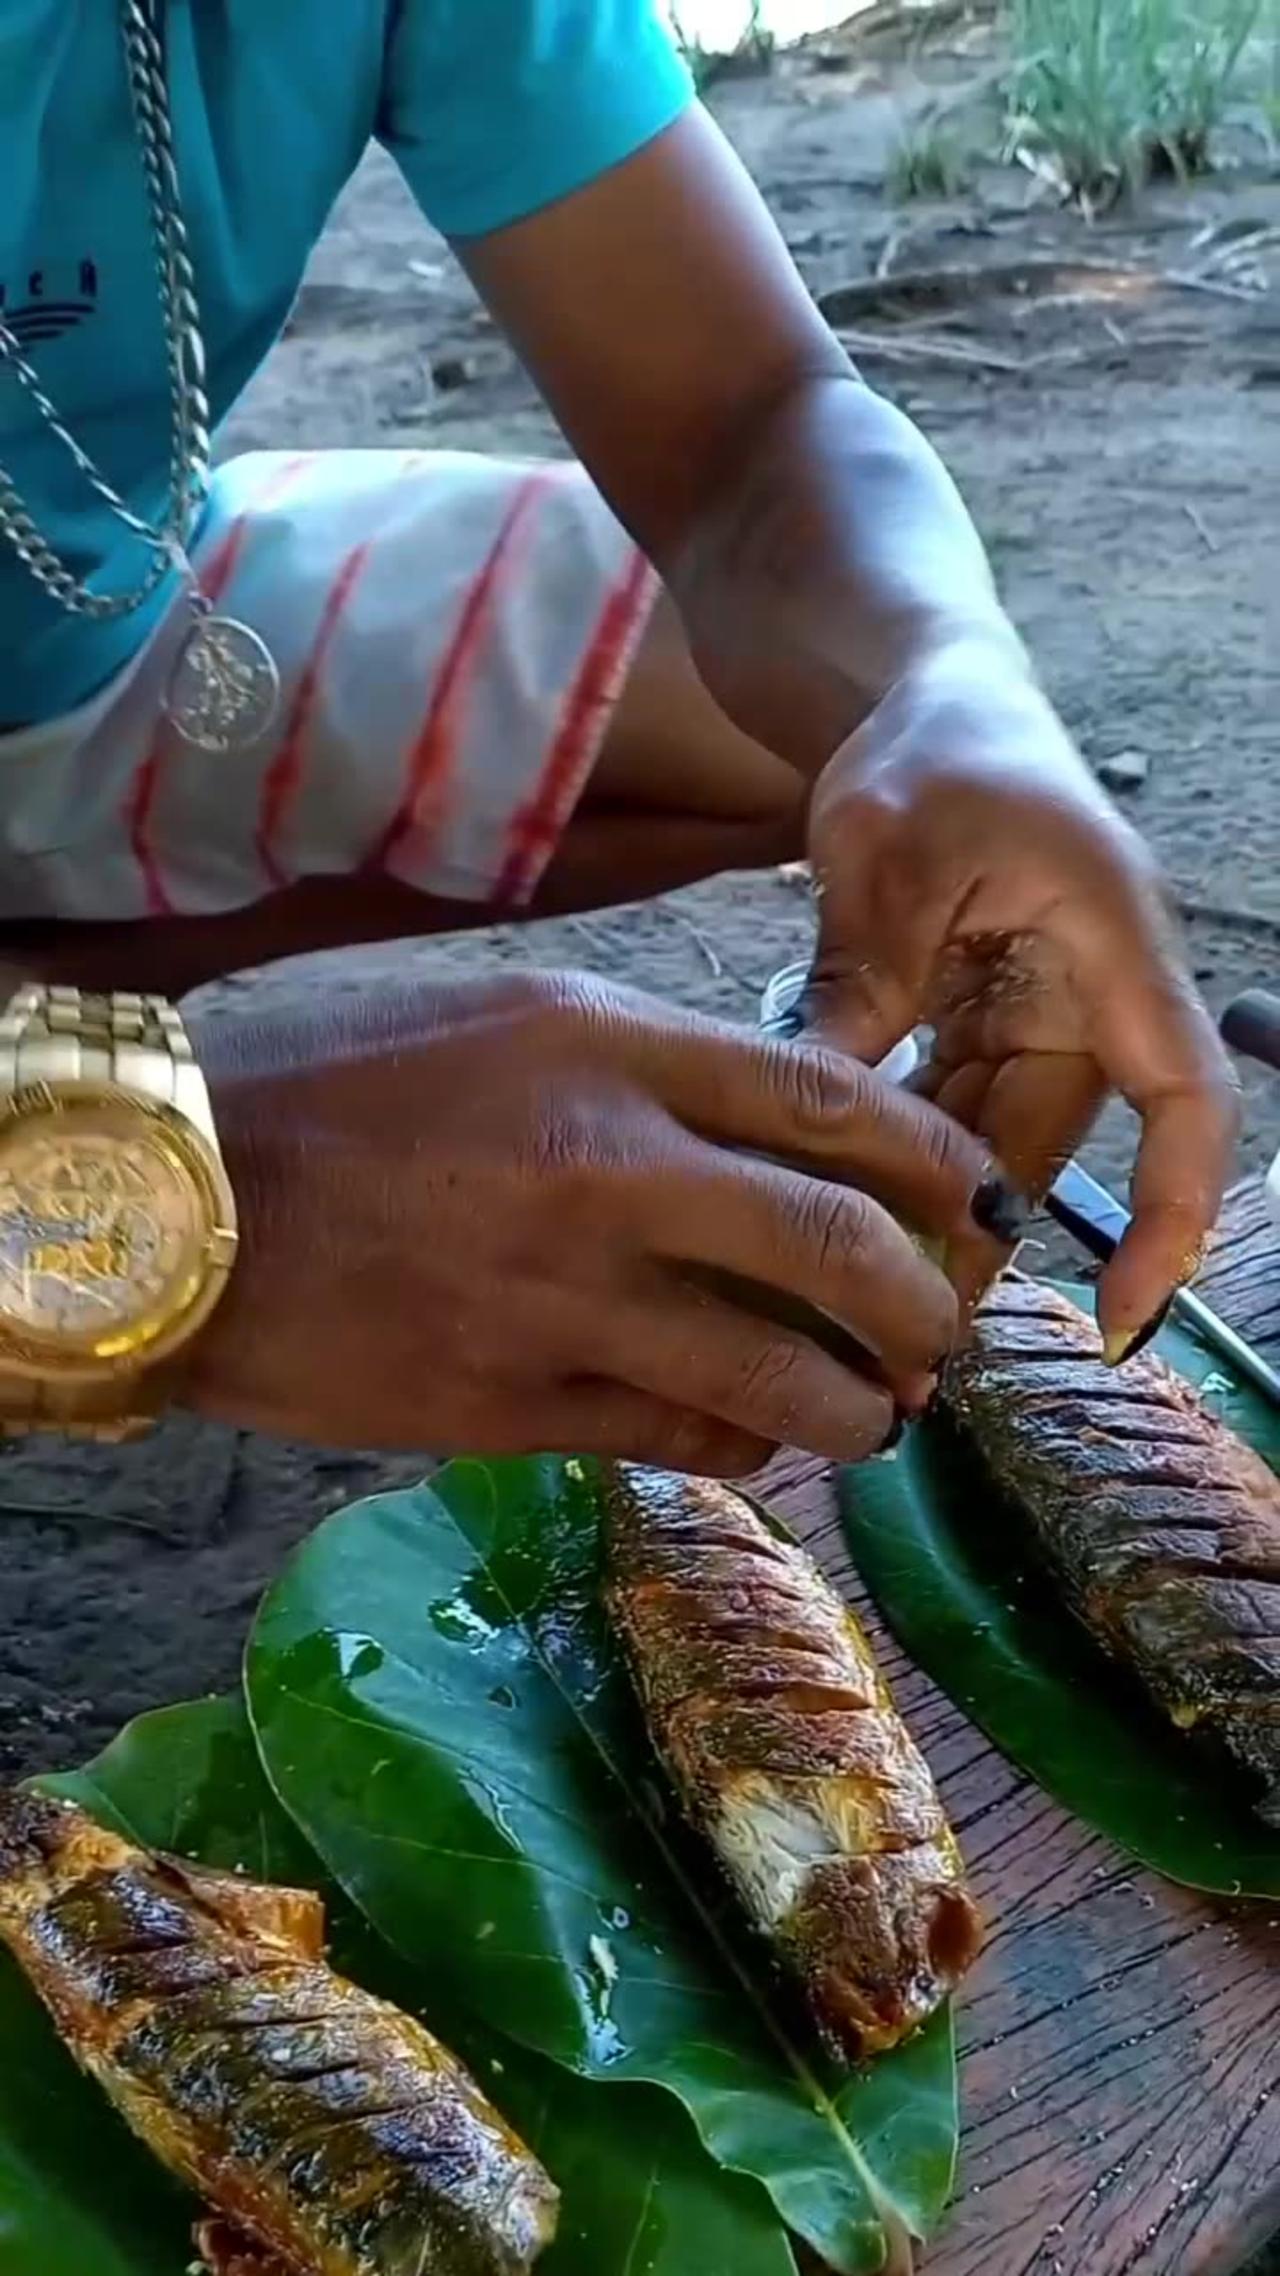 eating mackerel fish fried in palm oil